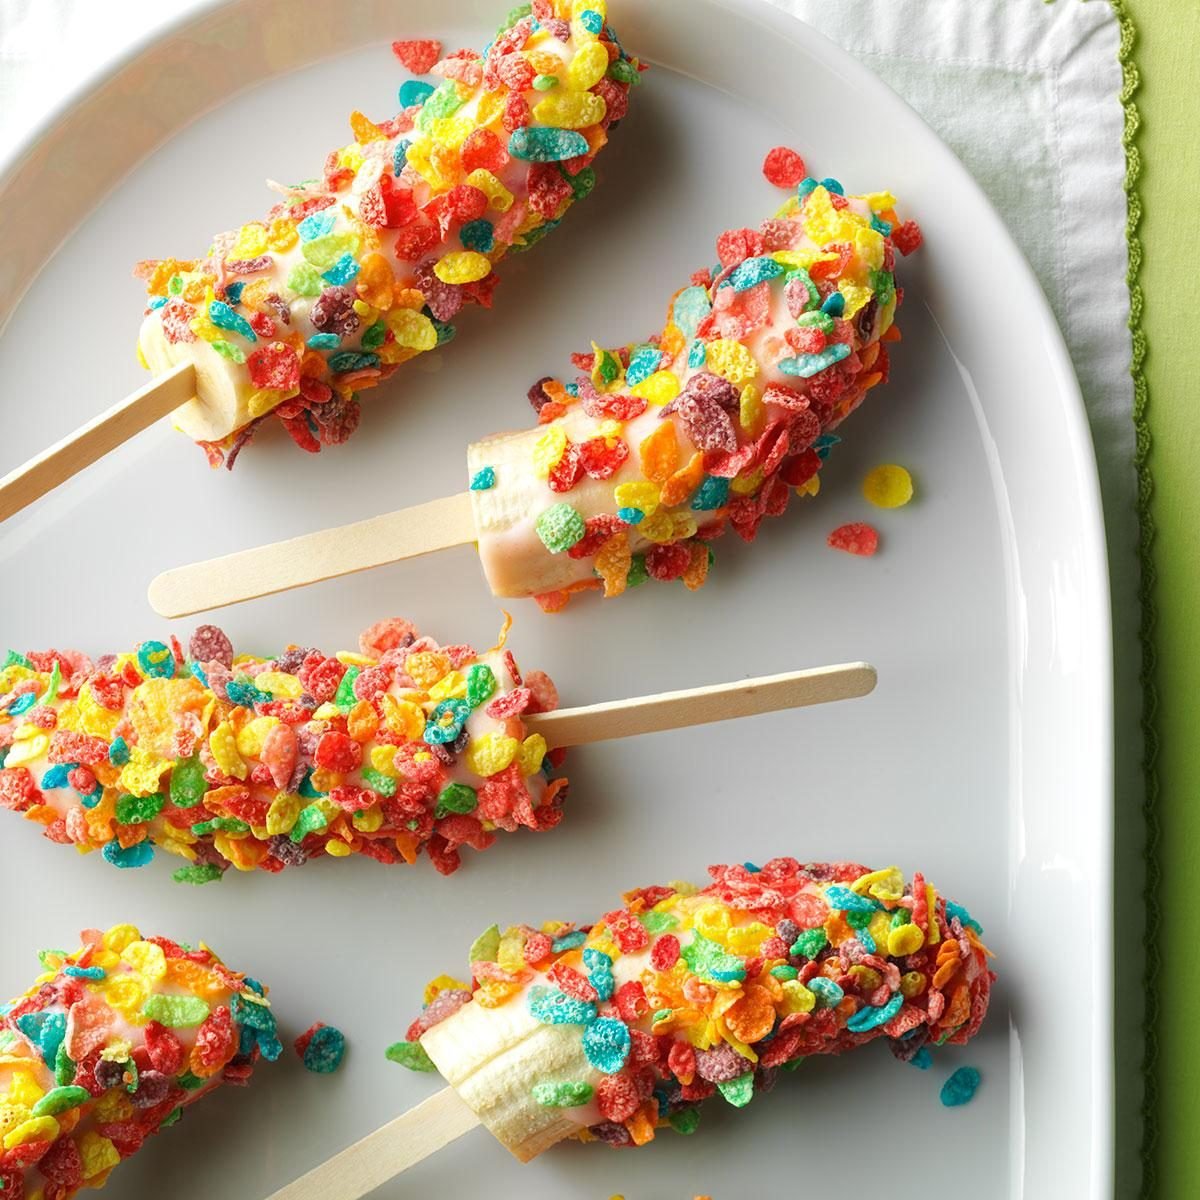 Middle School Age: Frozen Banana Cereal Pops